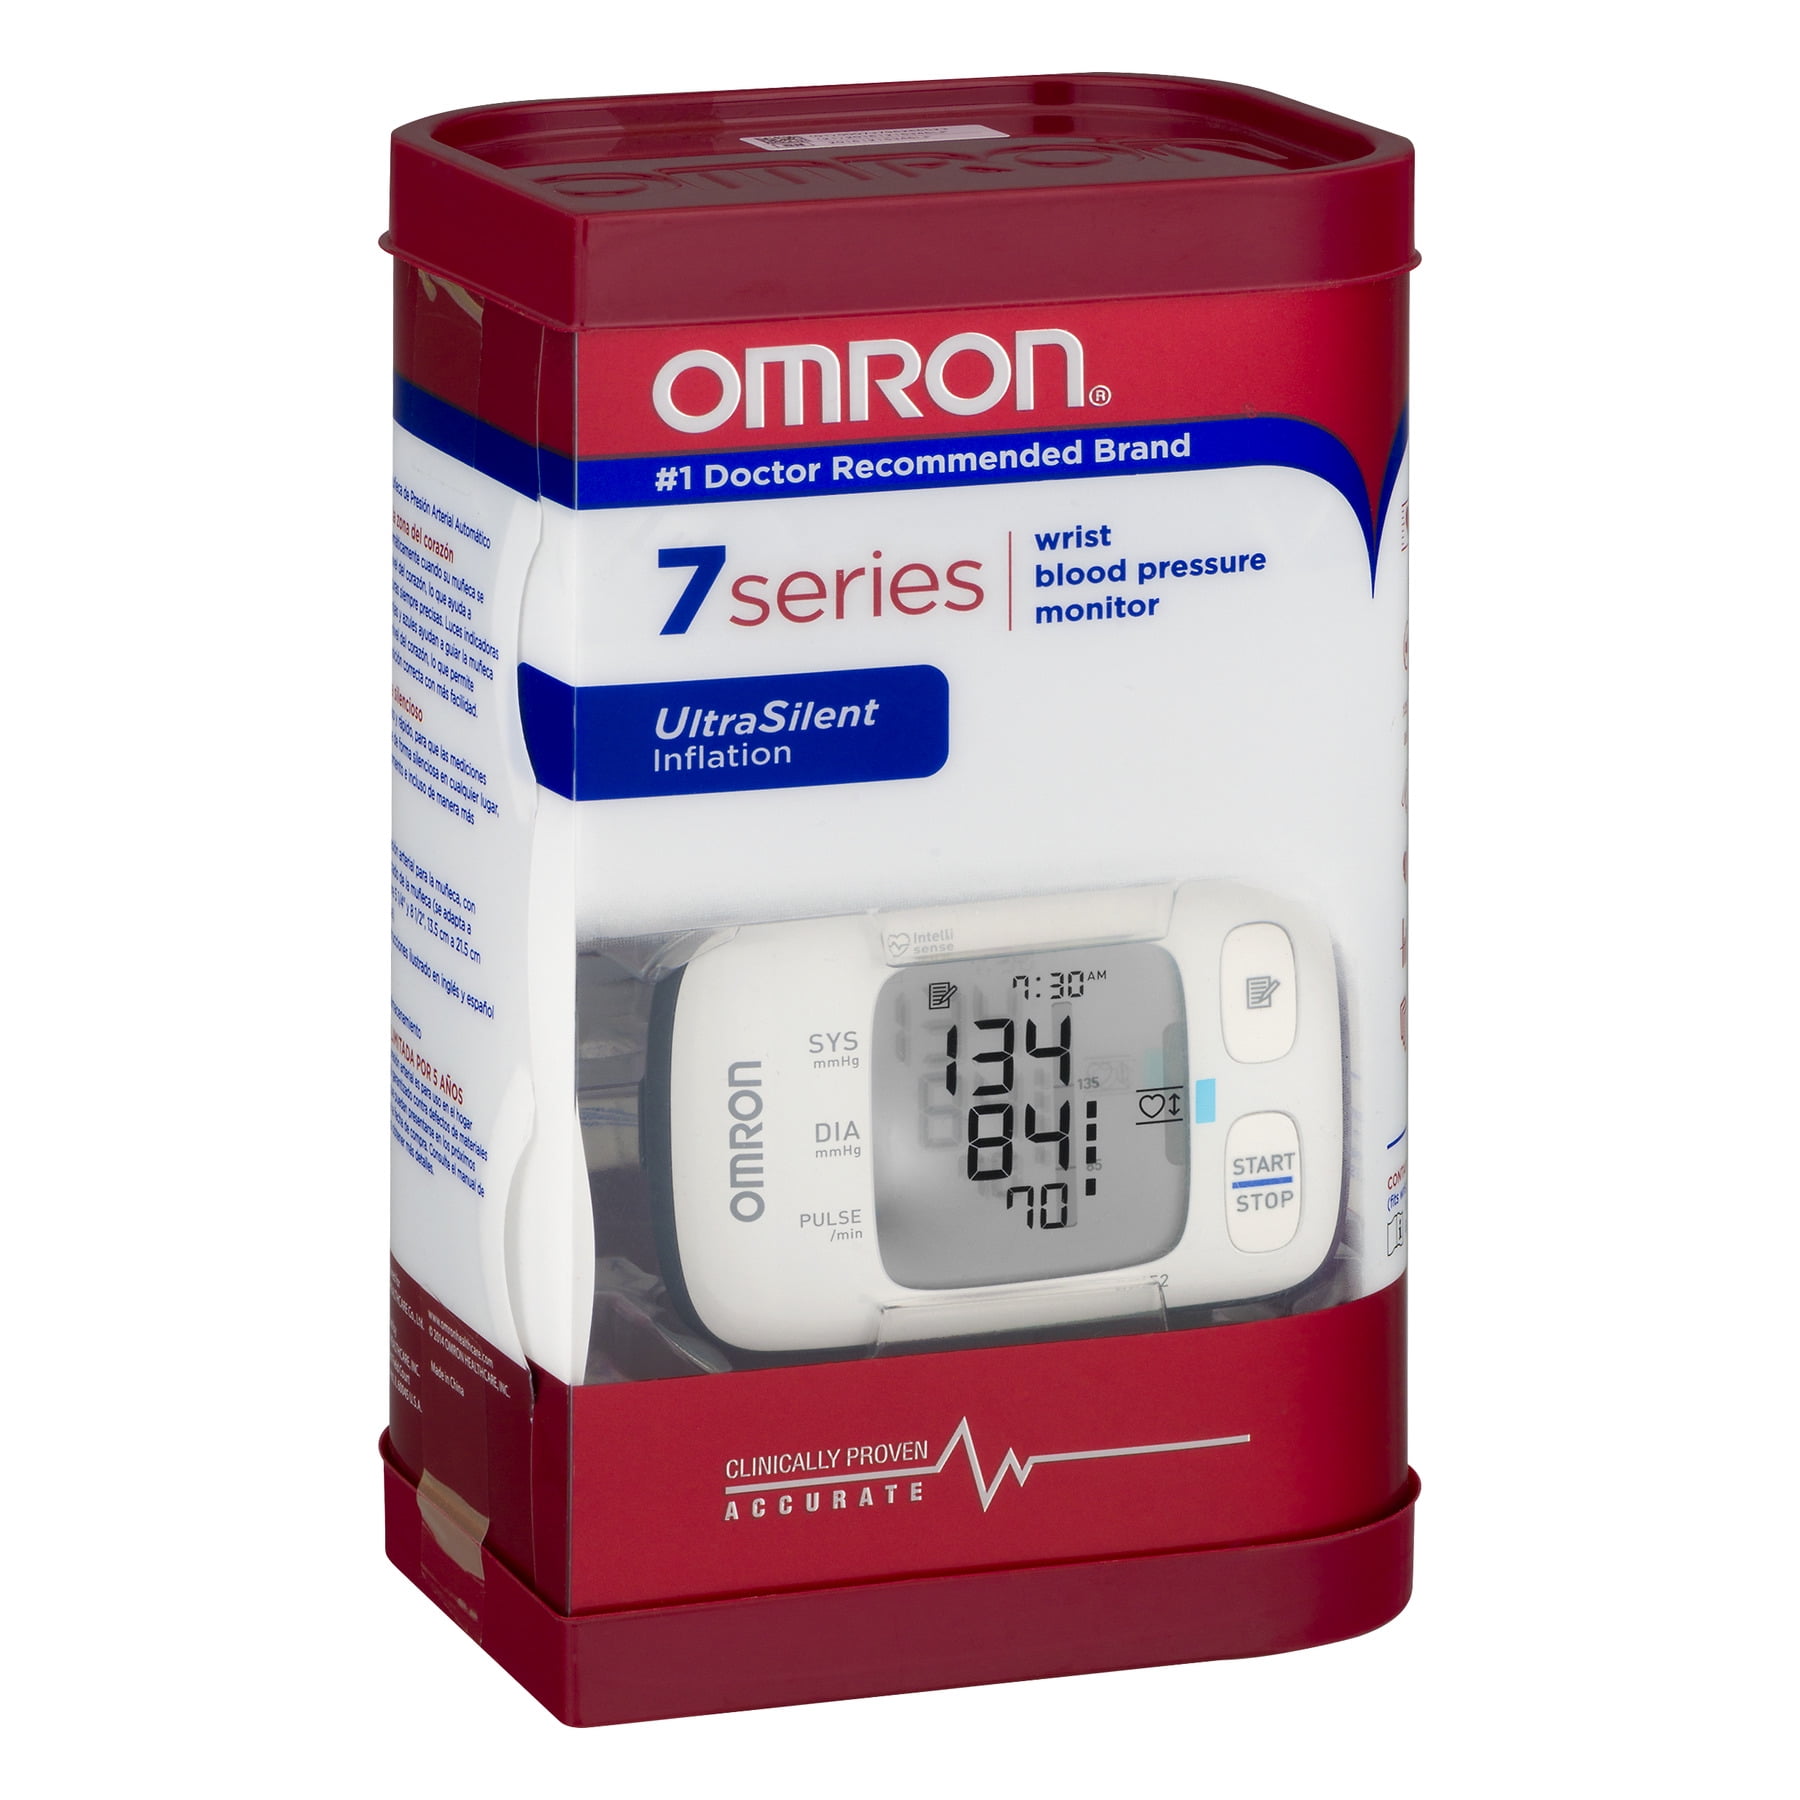 Omron 7 Series Blood Pressure Monitor with Bluetooth Smart Connectivity